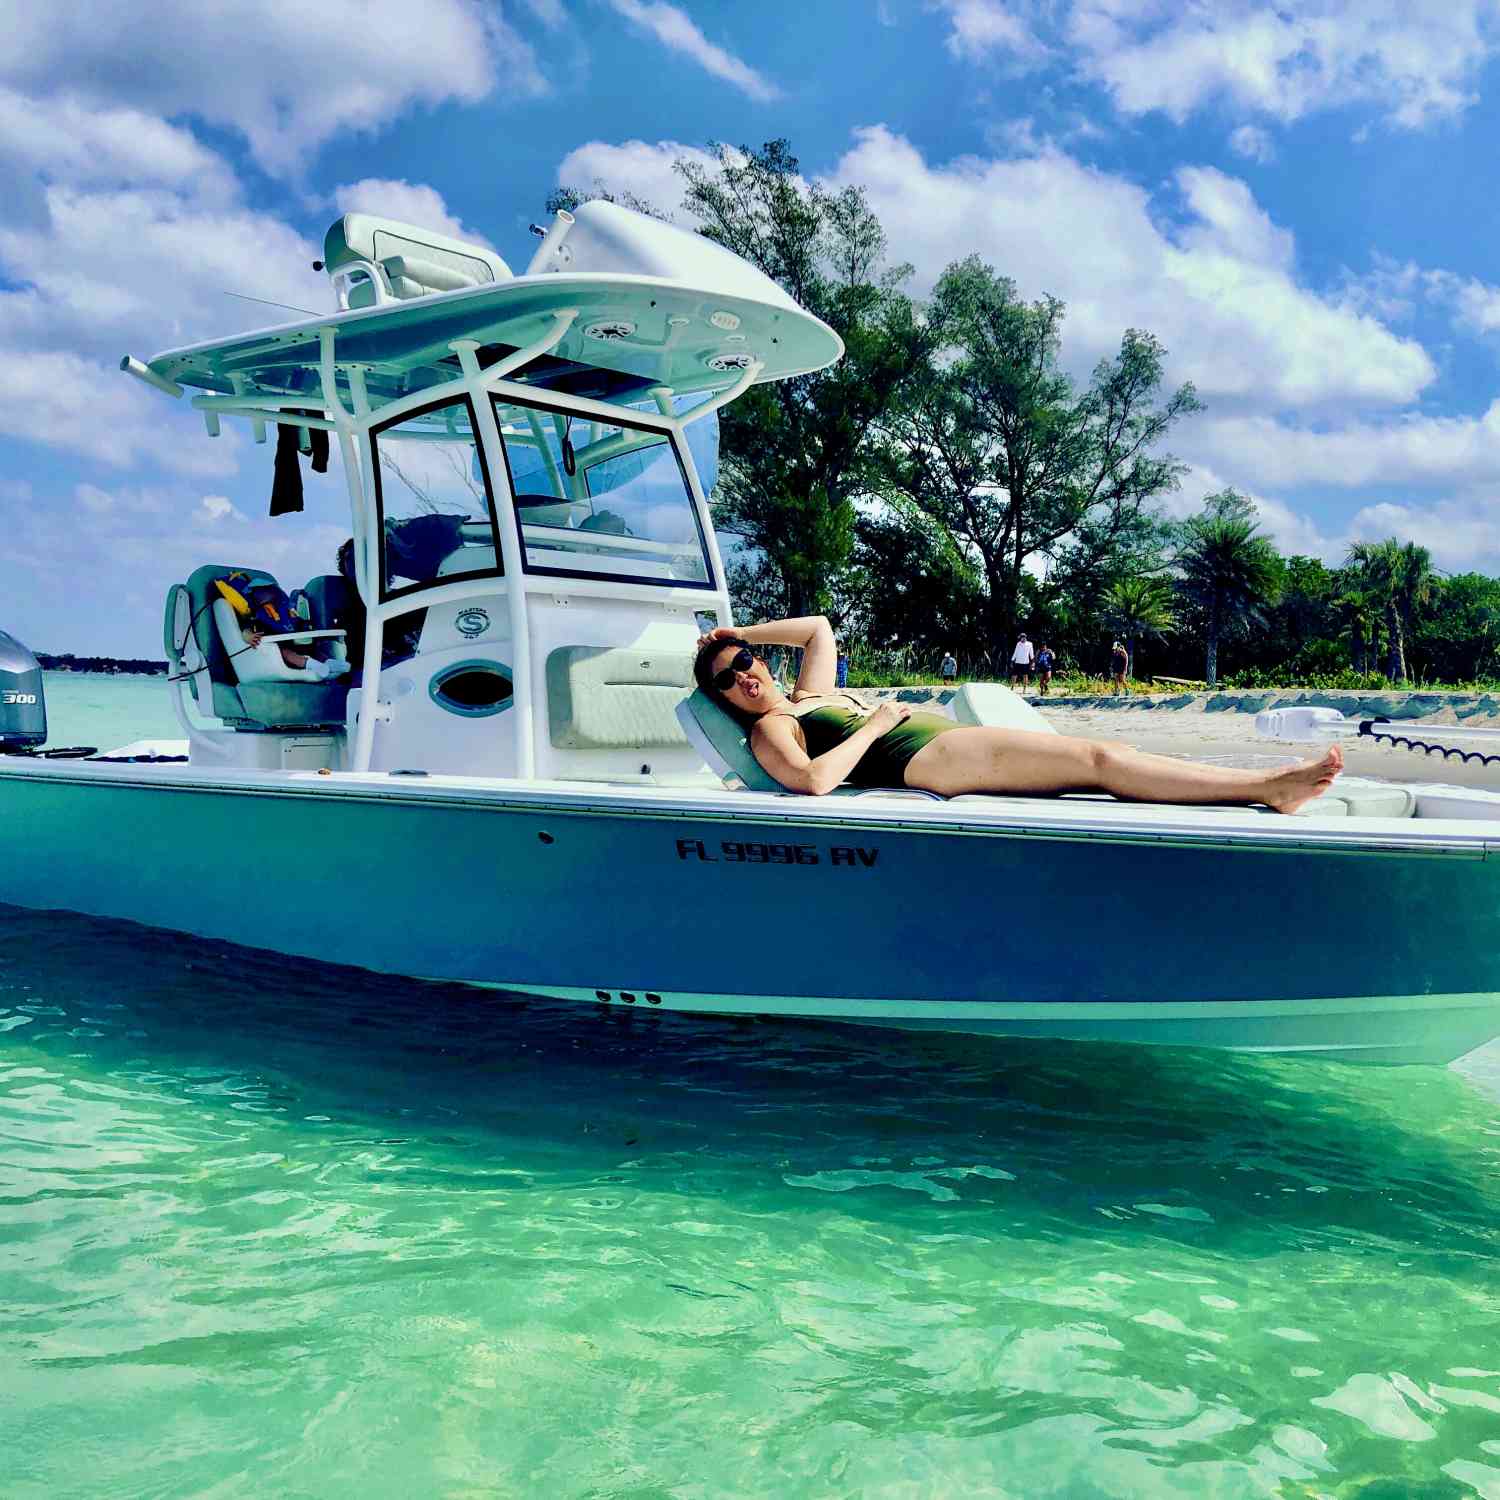 Title: Hot babes  soaking  up the rays - On board their Sportsman Masters 267 Bay Boat - Location: Bocilla island fl. Participating in the Photo Contest #SportsmanJune2021